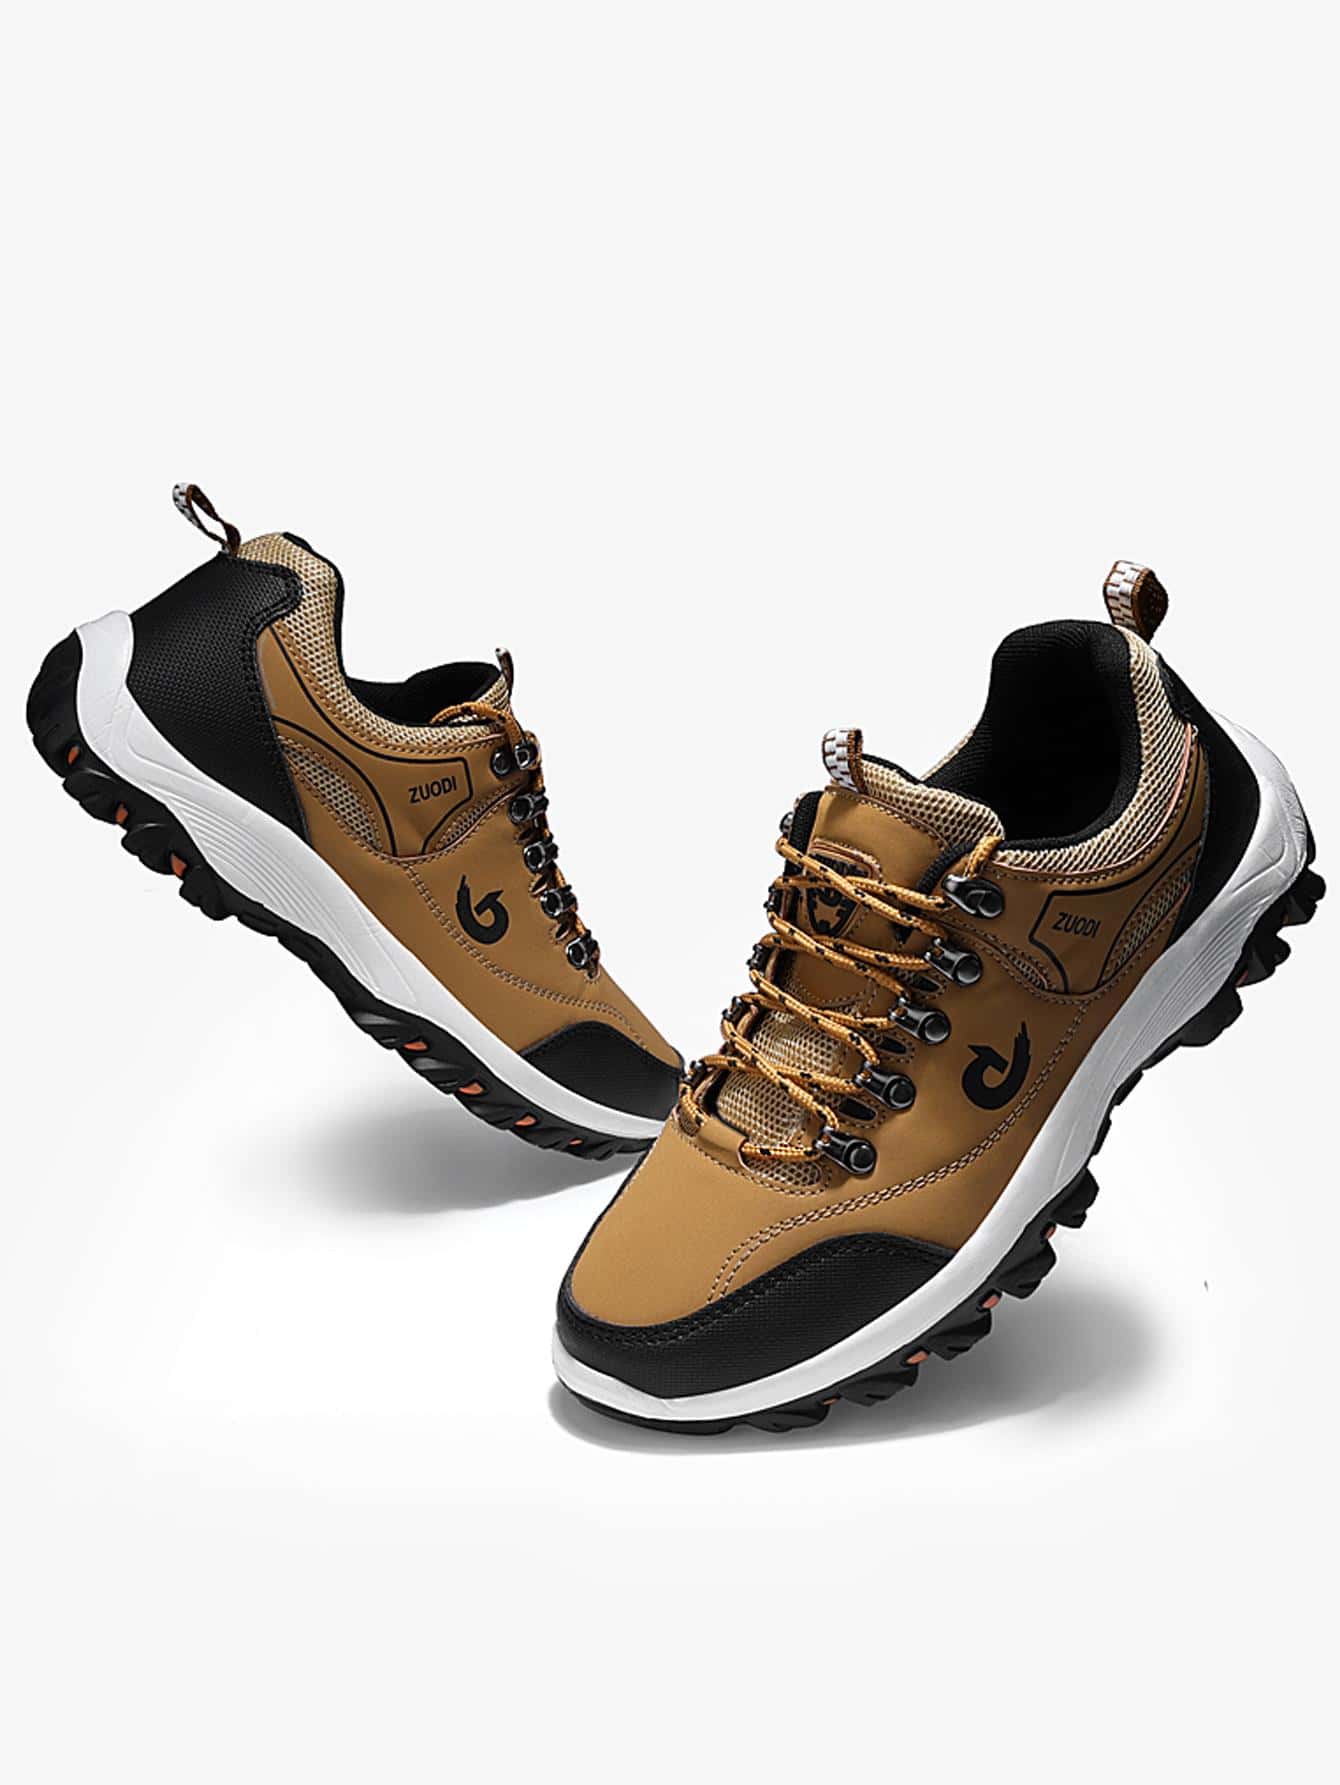 New Arrival, Fall/Winter Sports Shoes, Large Size, Waterproof & Slip-Resistant, Outdoor Walking, Casual, Light Weight And Hiking Shoes